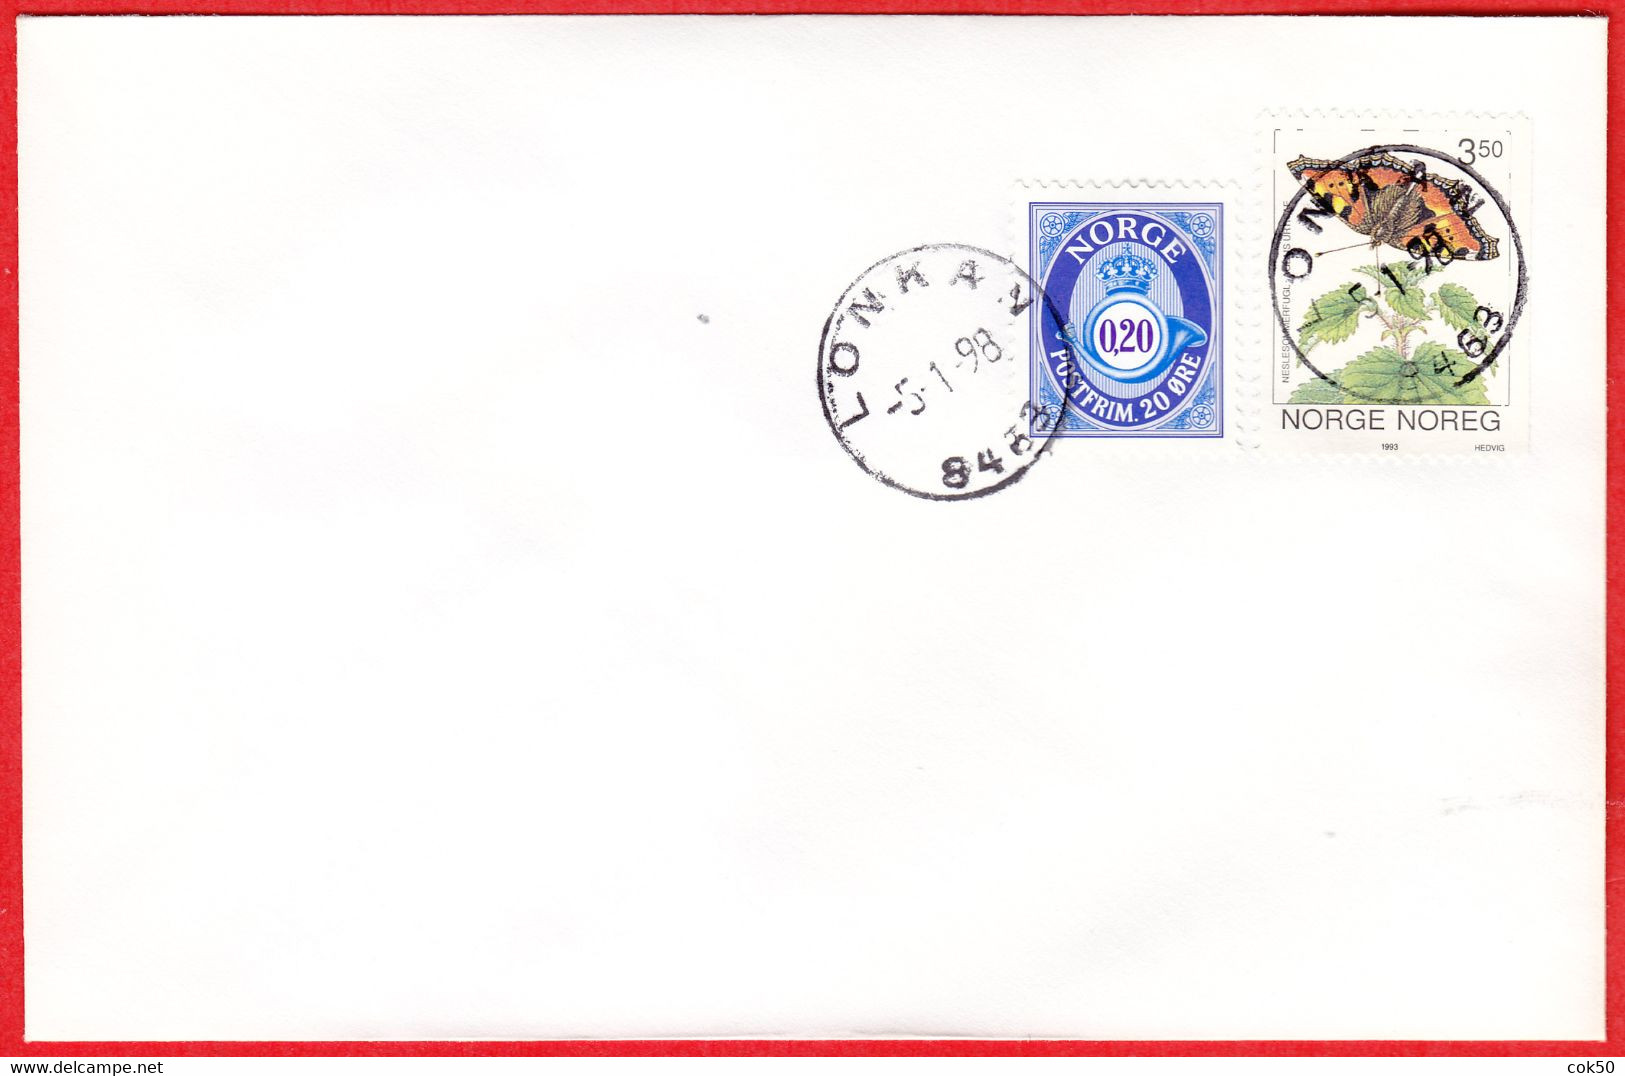 NORWAY -  8463 LONKAN (Nordland County) - Last Day/postoffice Closed On 1998.01.05 - Local Post Stamps